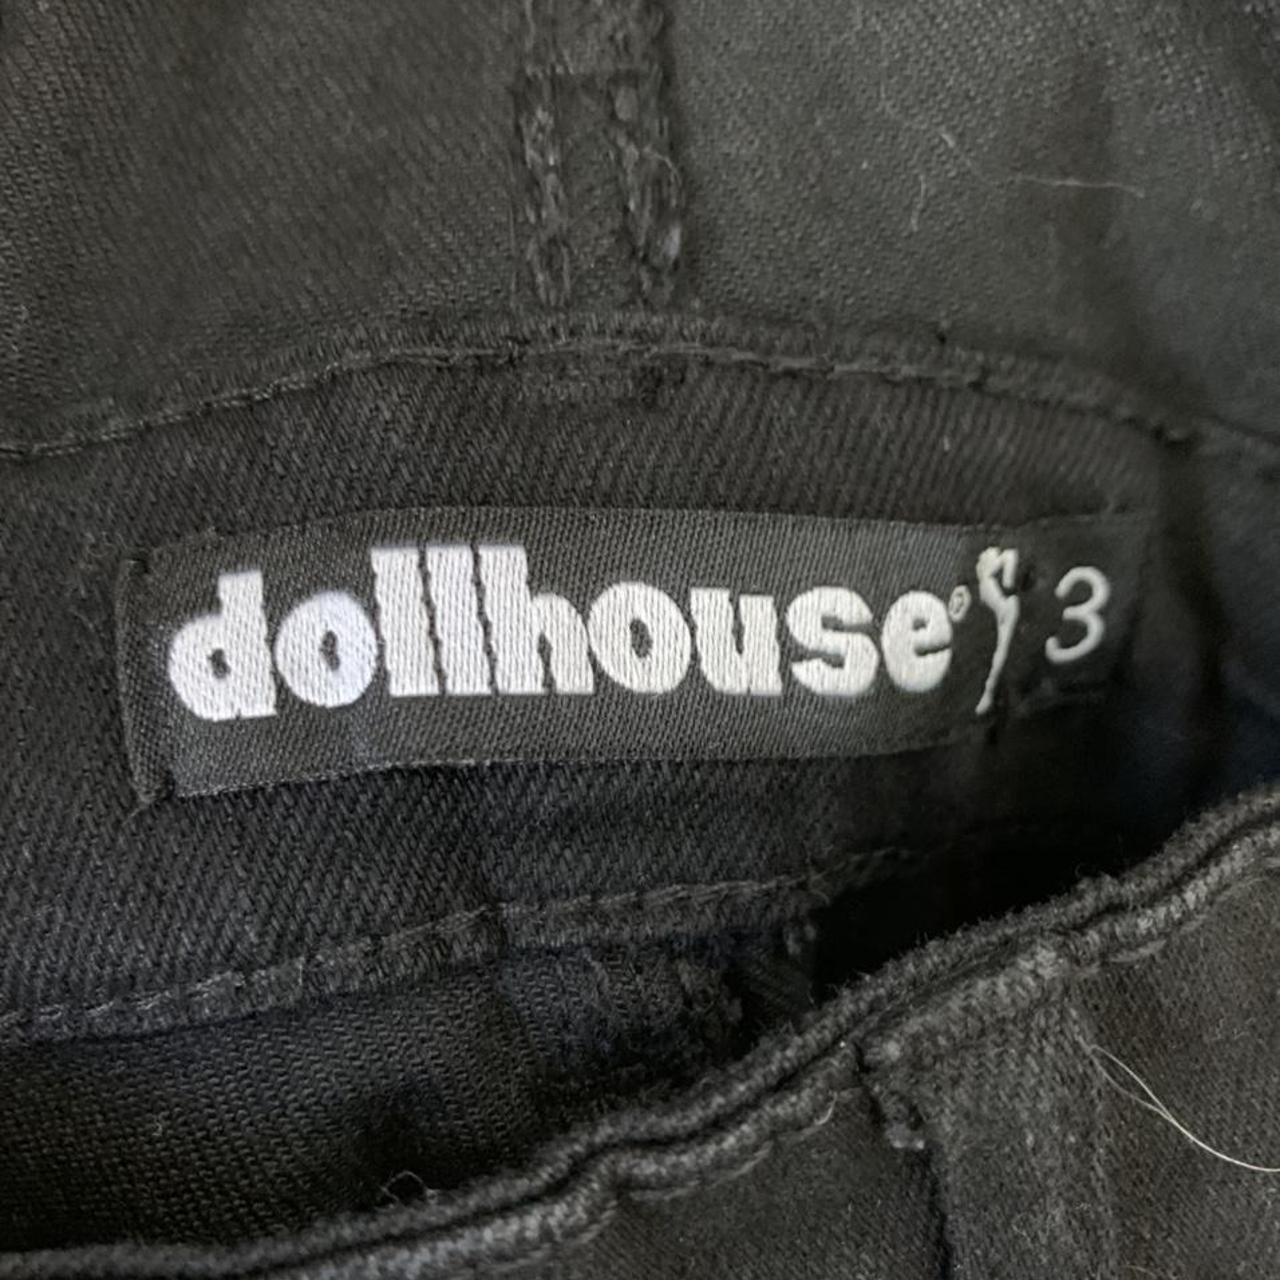 Product Image 1 - Dollhouse Black Overalls. 

Brand: Dollhouse

#Blackoveralls